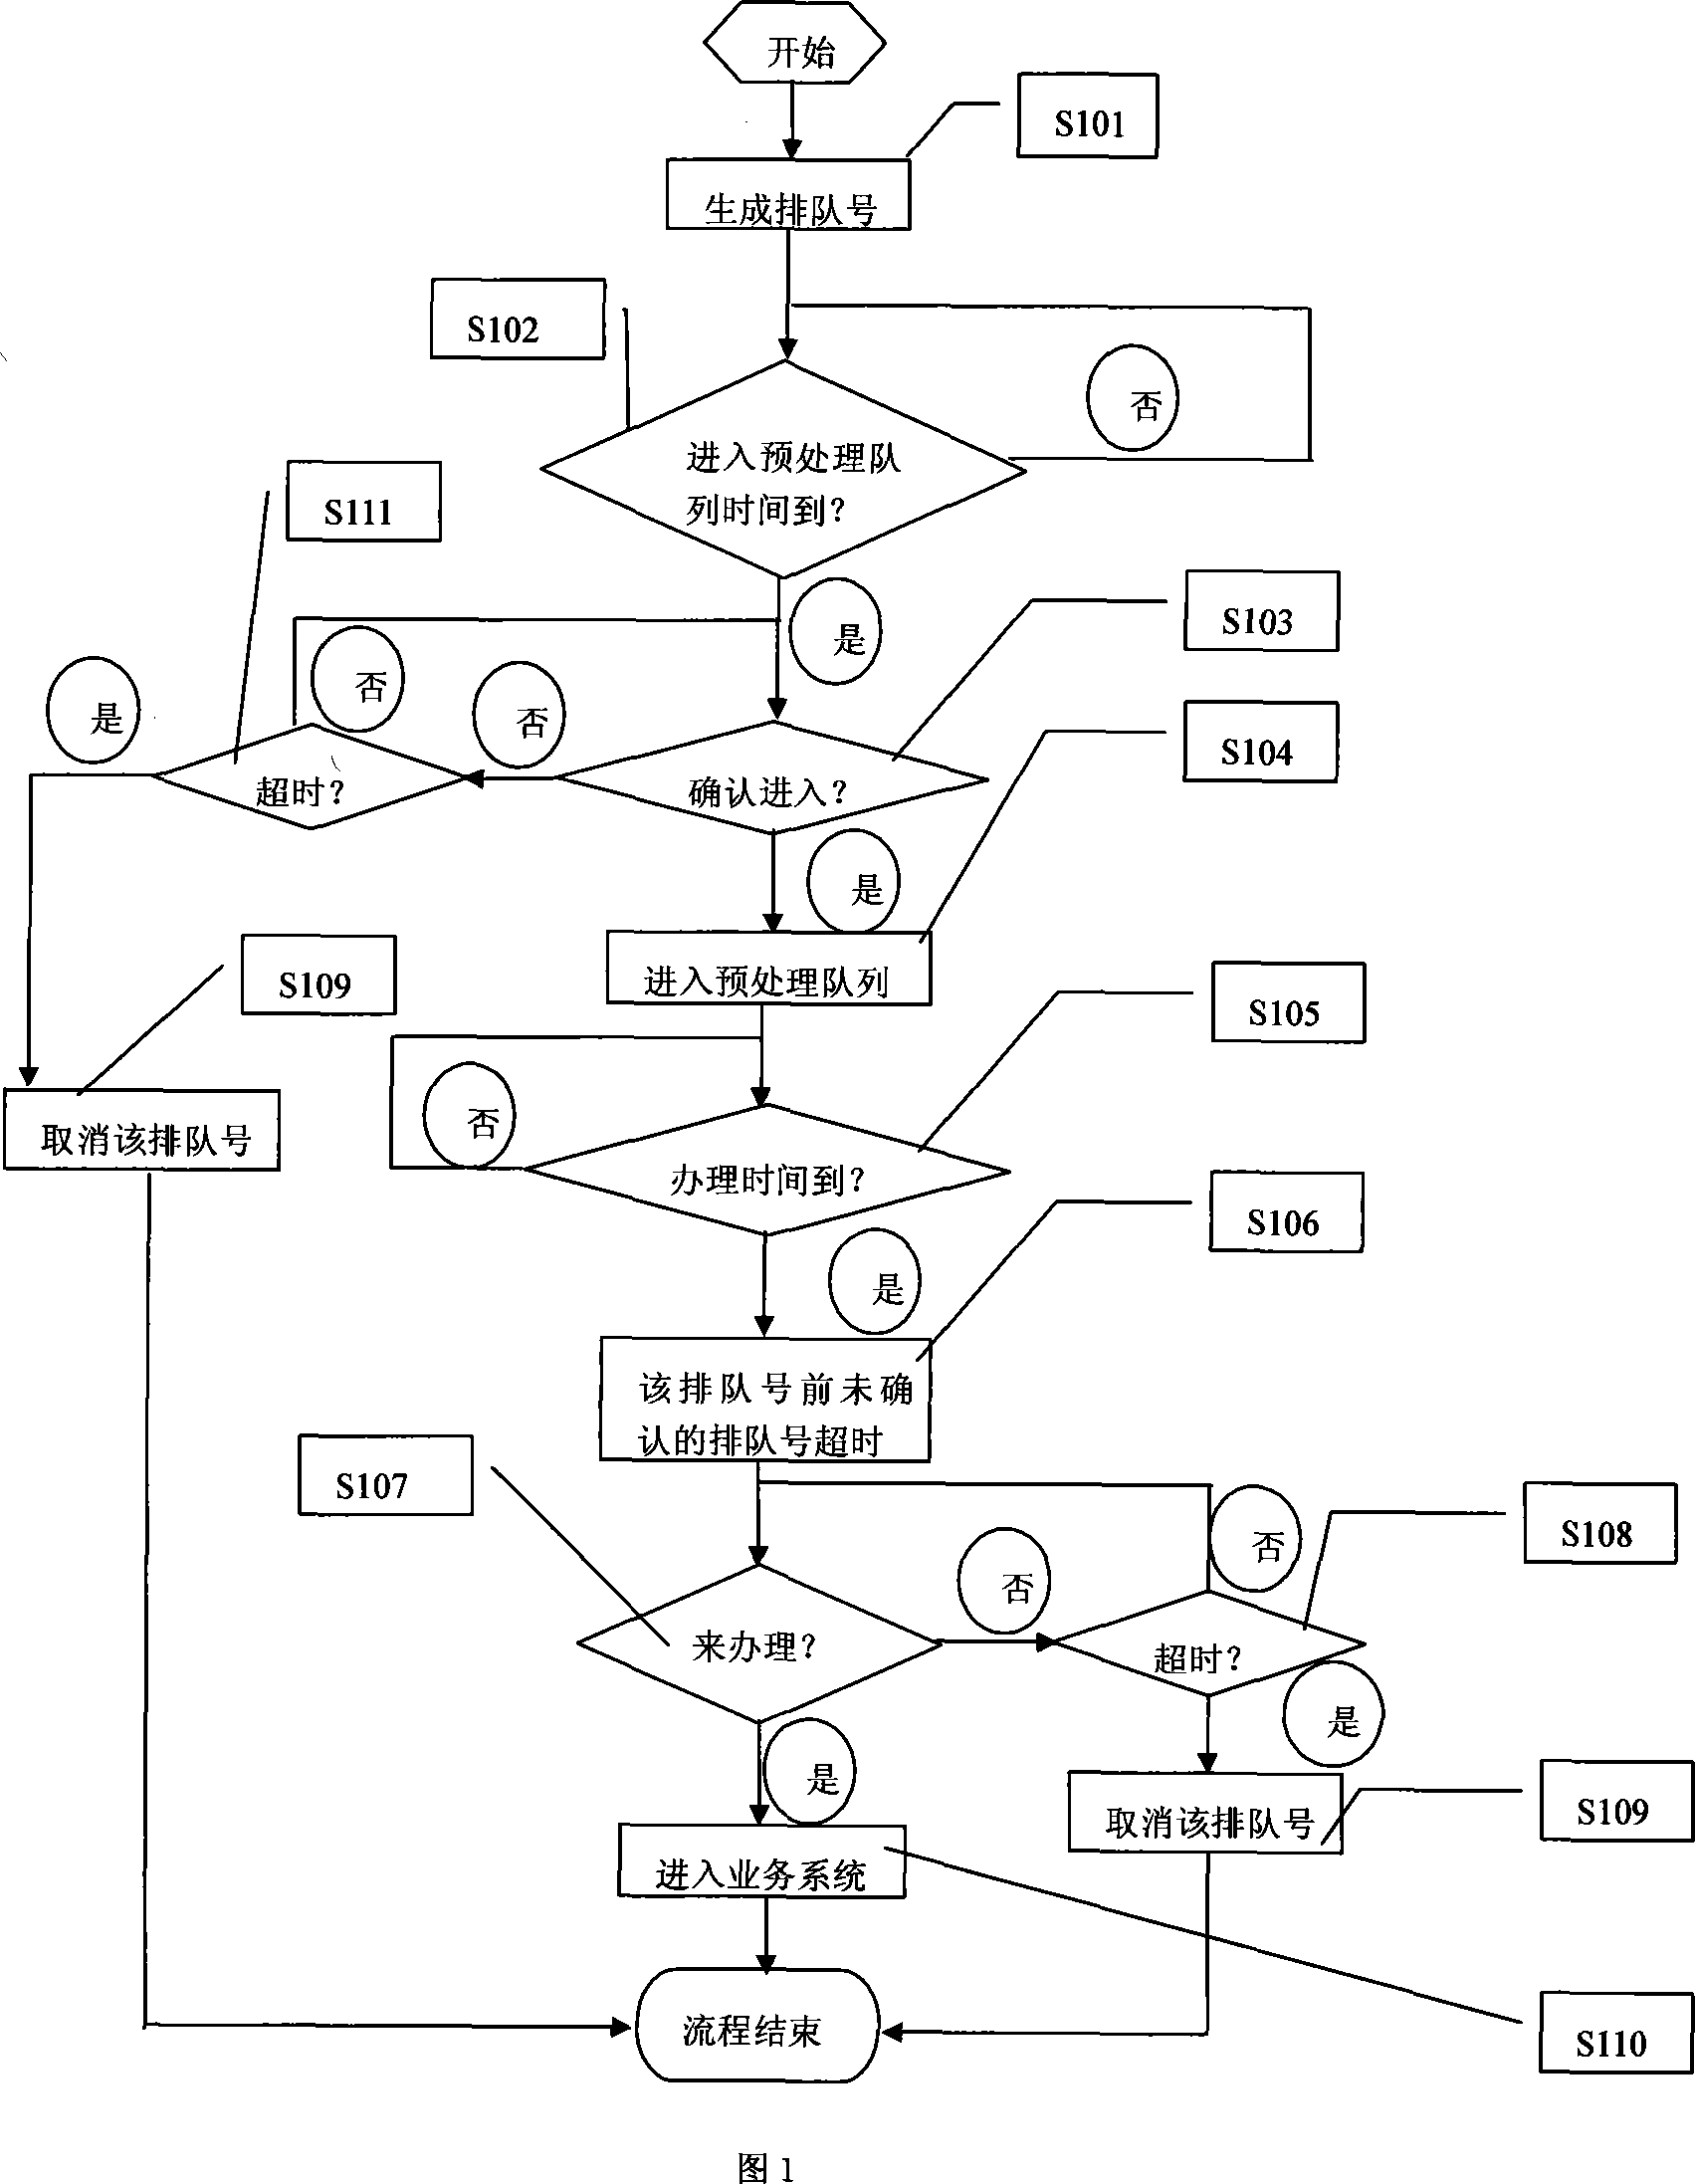 Method and system for managing queueing